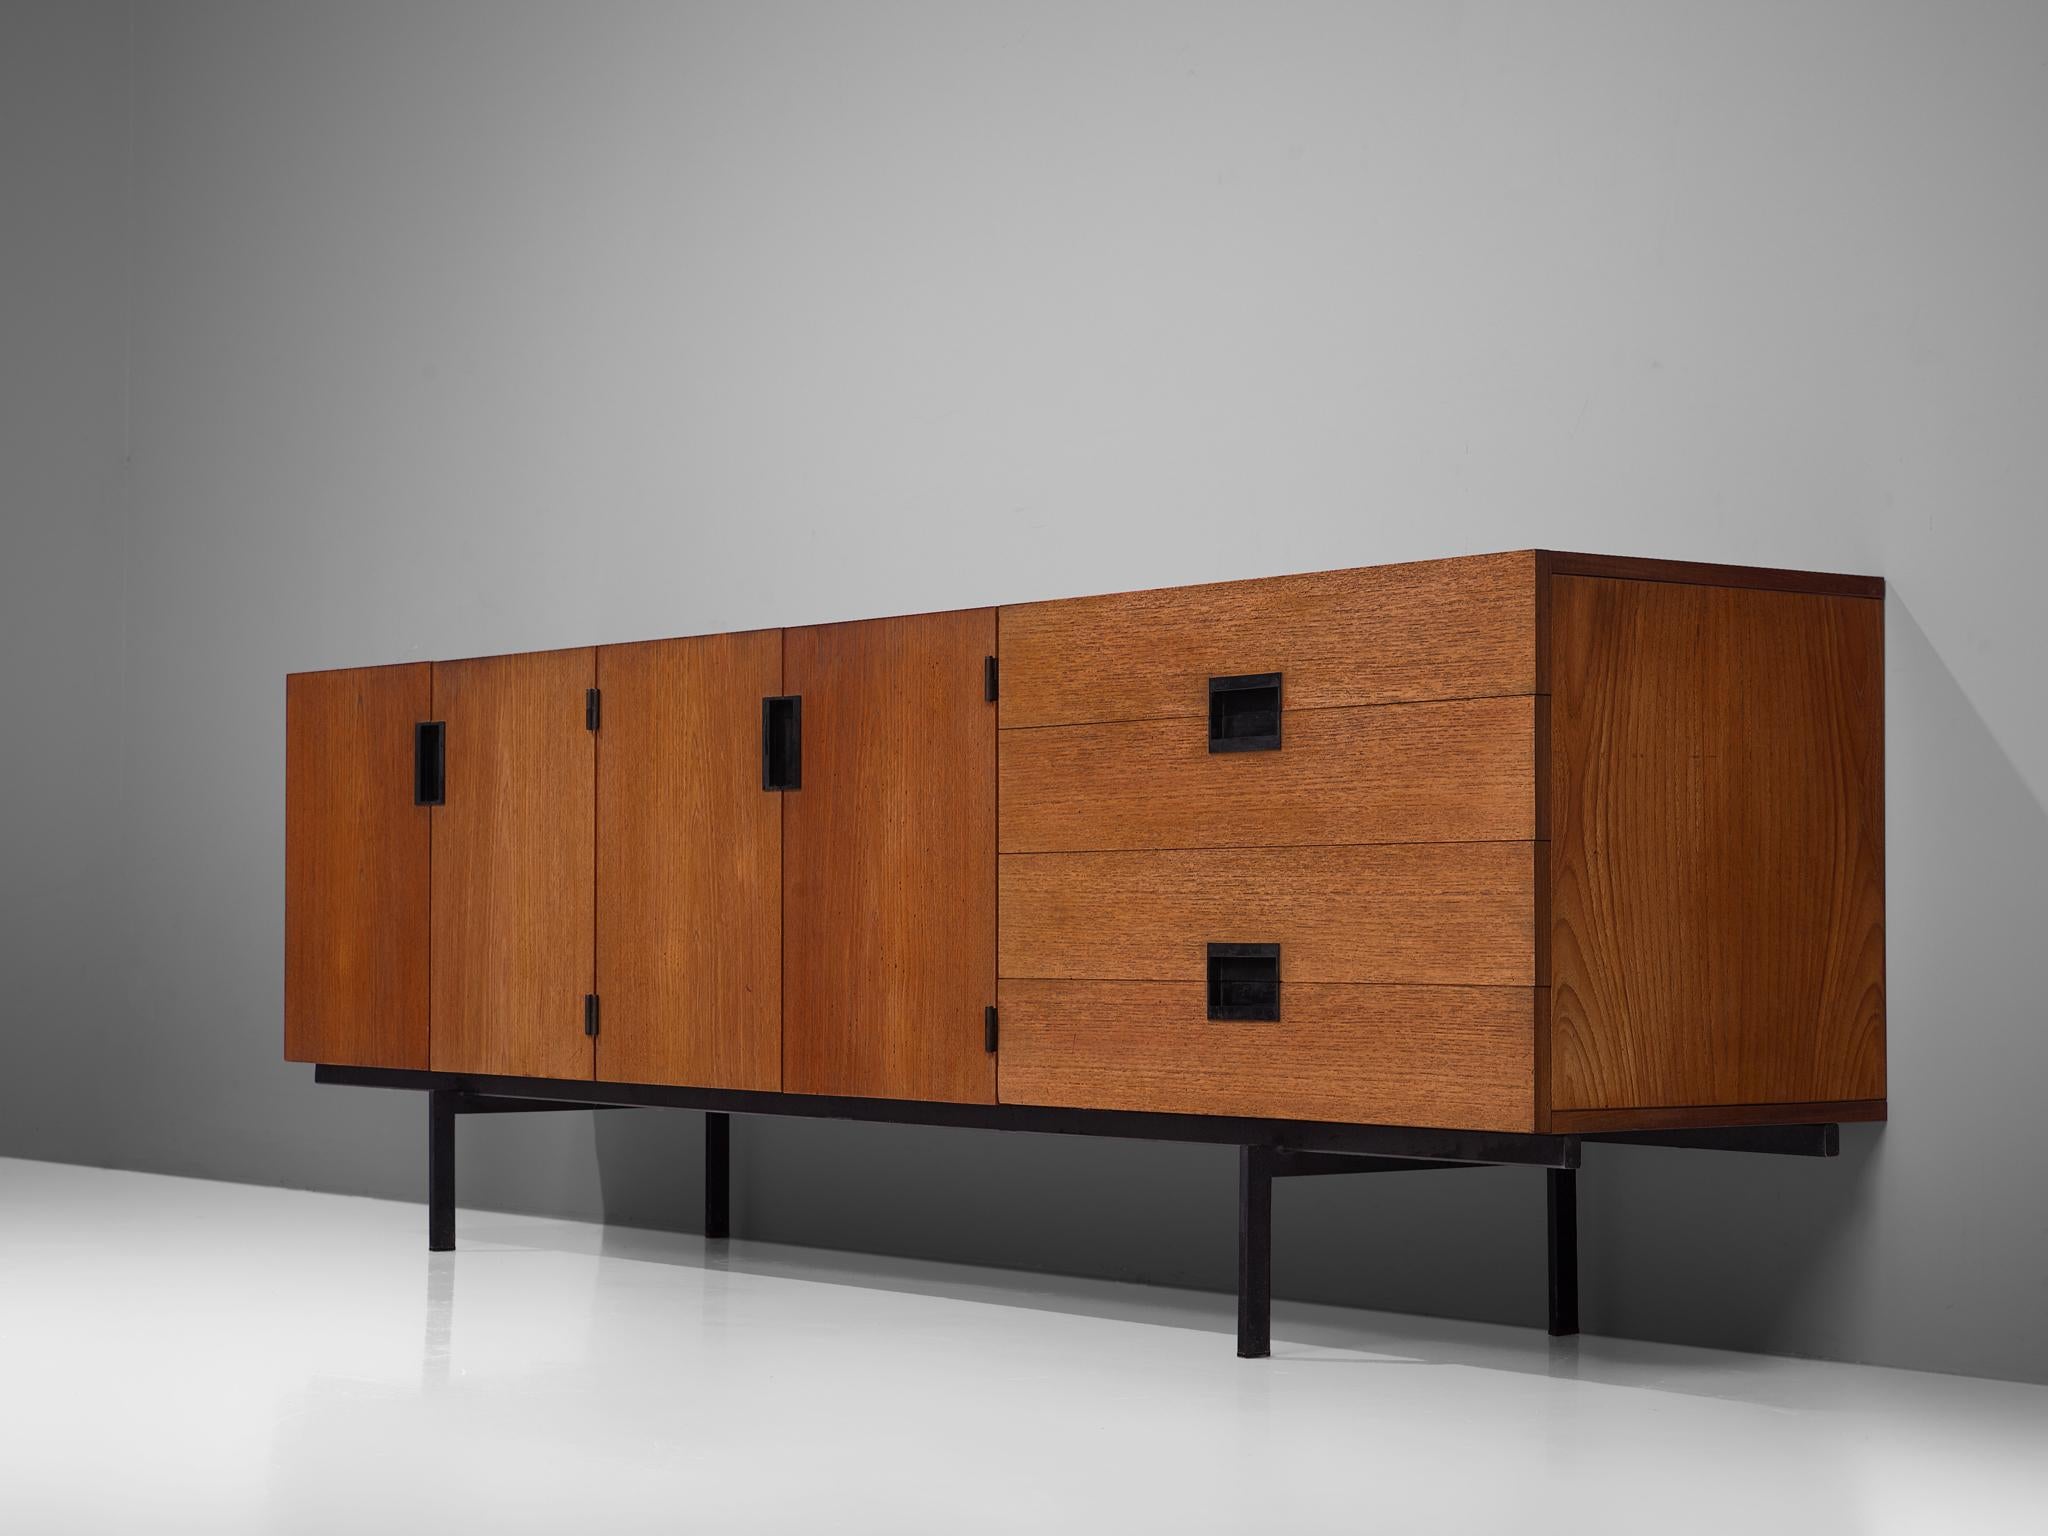 Cees Braakman for UMS Pastoe, sideboard model DU03, teak and metal, by The Netherlands, design 1958, production 1960s

Elegant and modest teak sideboard by Cees Braakman for UMS Pastoe. This sideboard consists of a small metal base, which creates